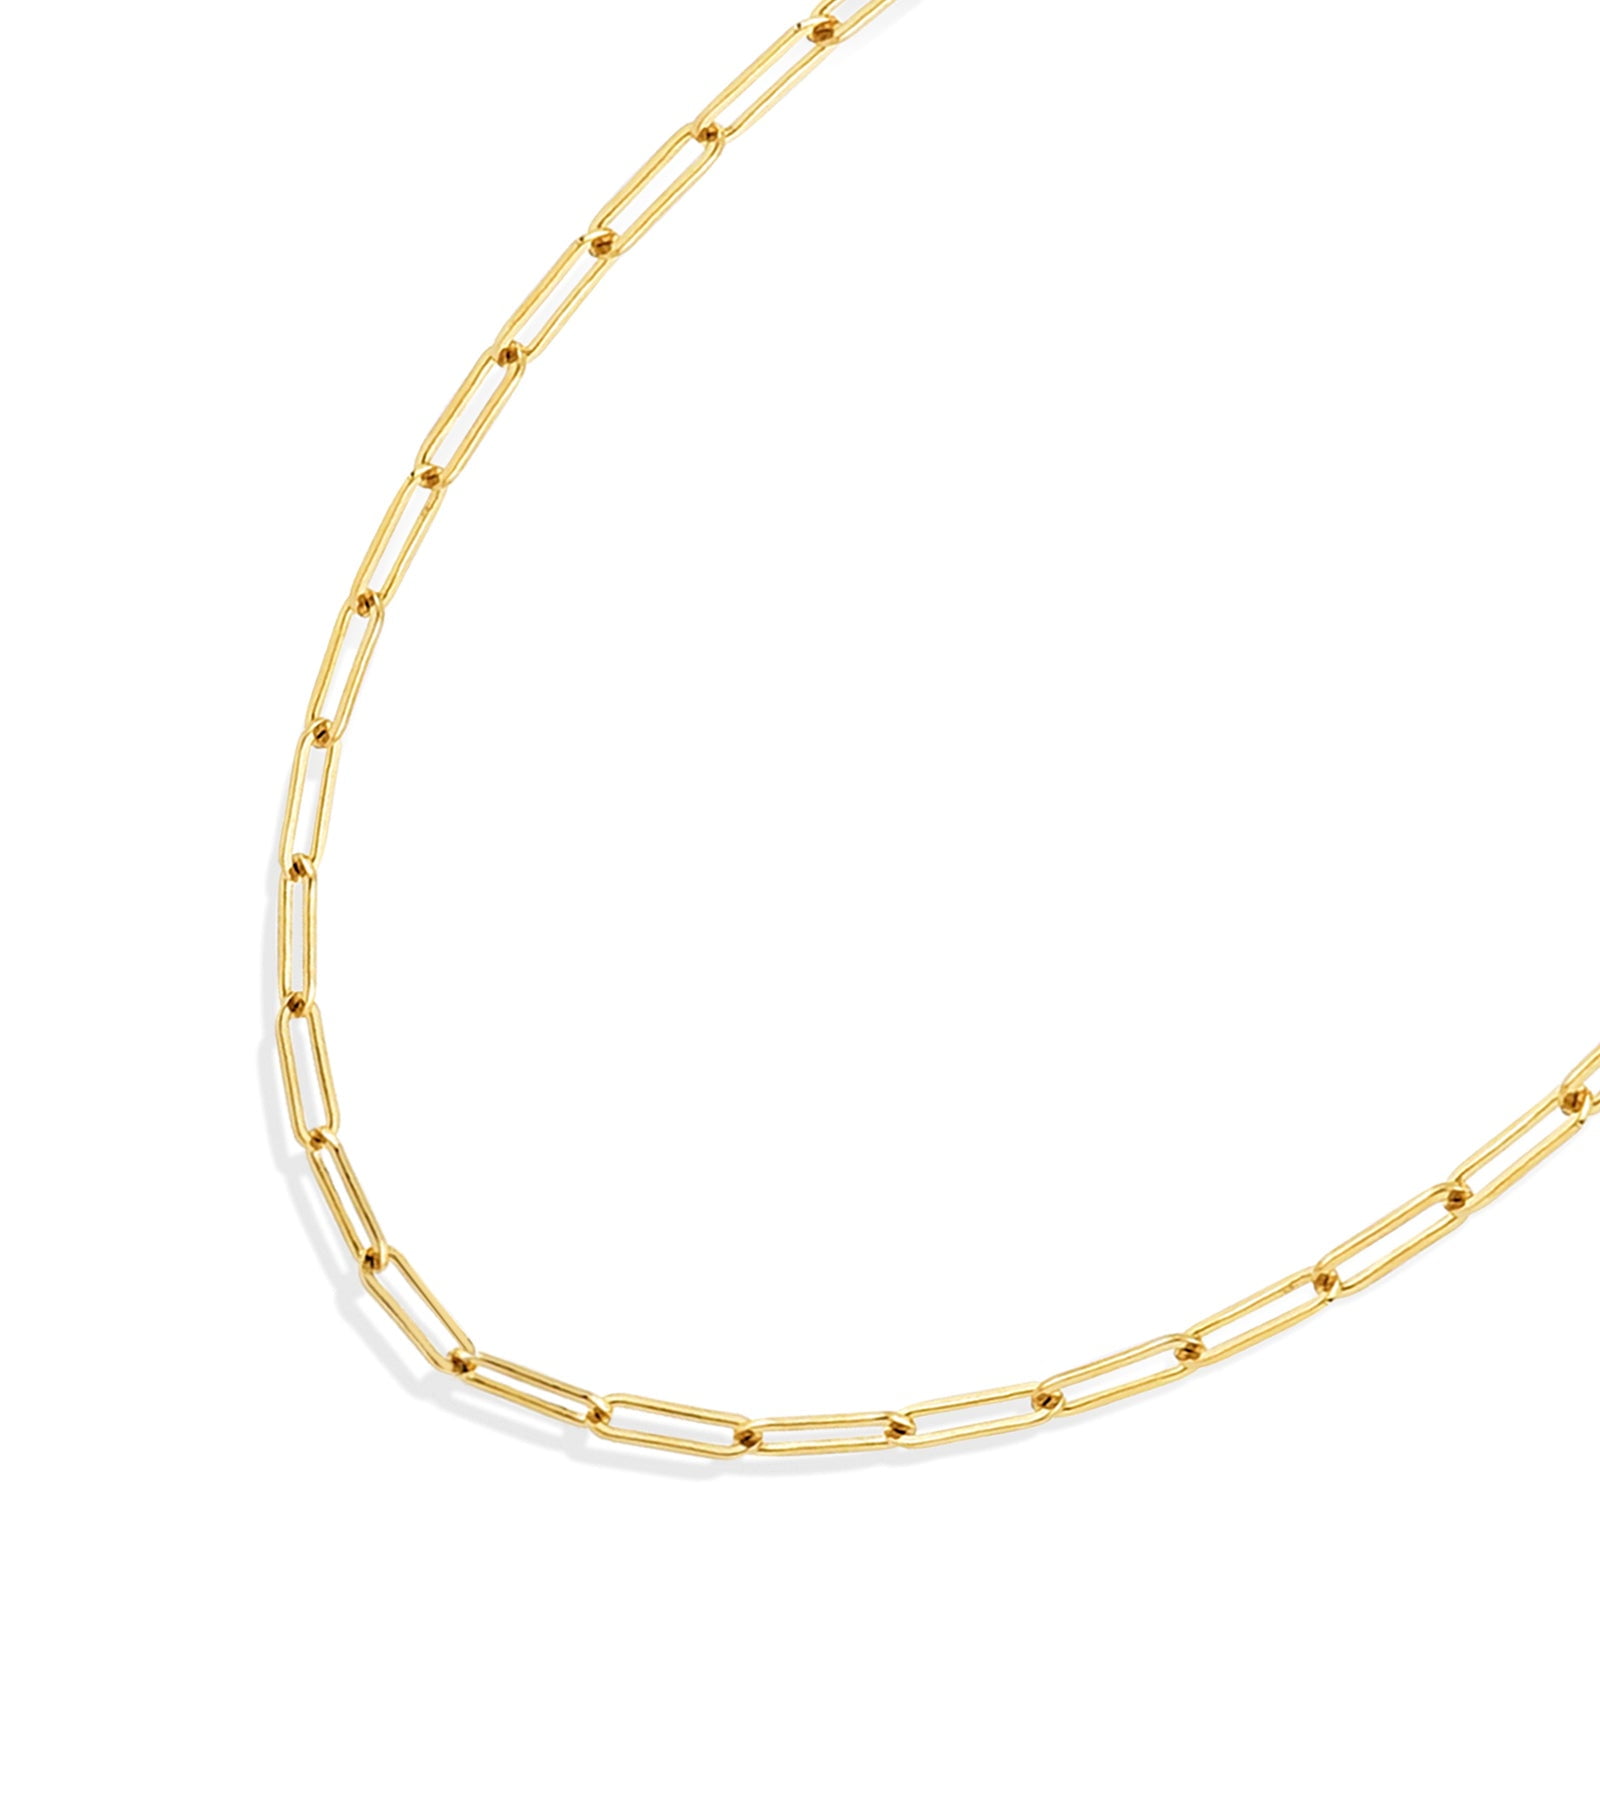 Jewelry Atelier Gold Chain Necklace Collection - 14K Solid Yellow Gold ...